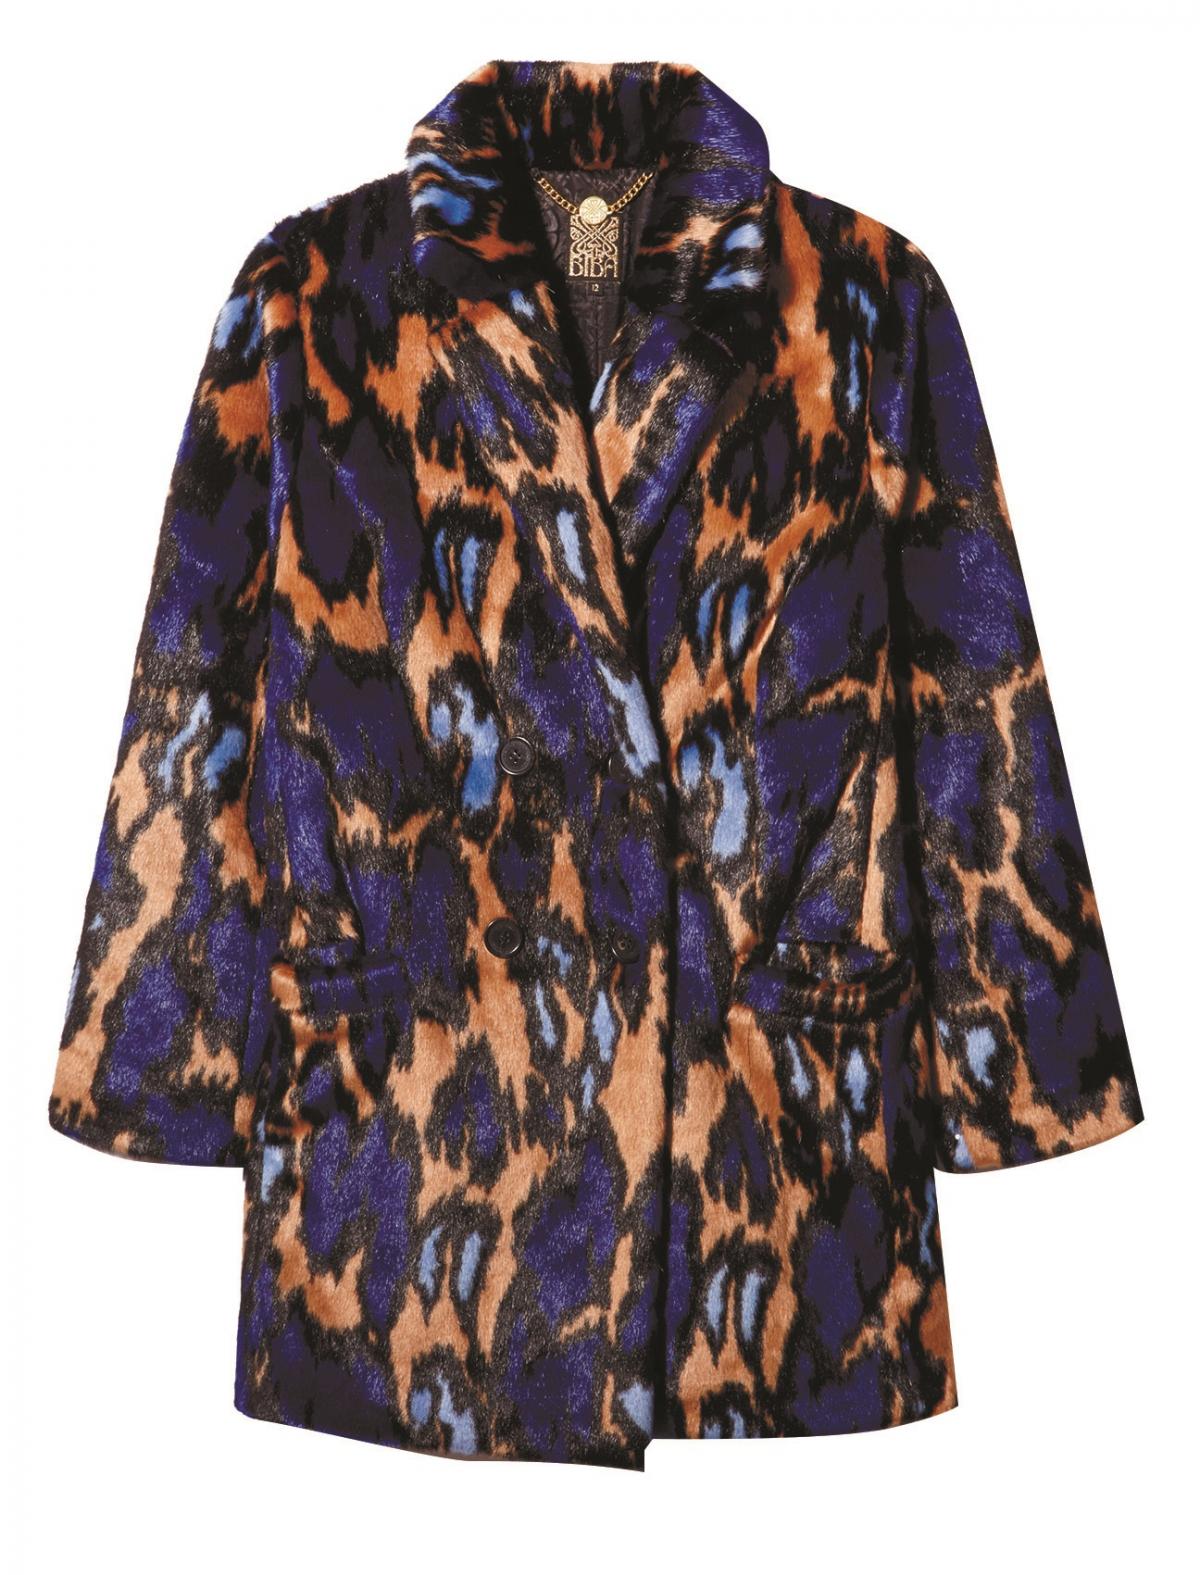 House of Fraser, Biba Blue and Brown Leopard Faux Fur Coat, £179